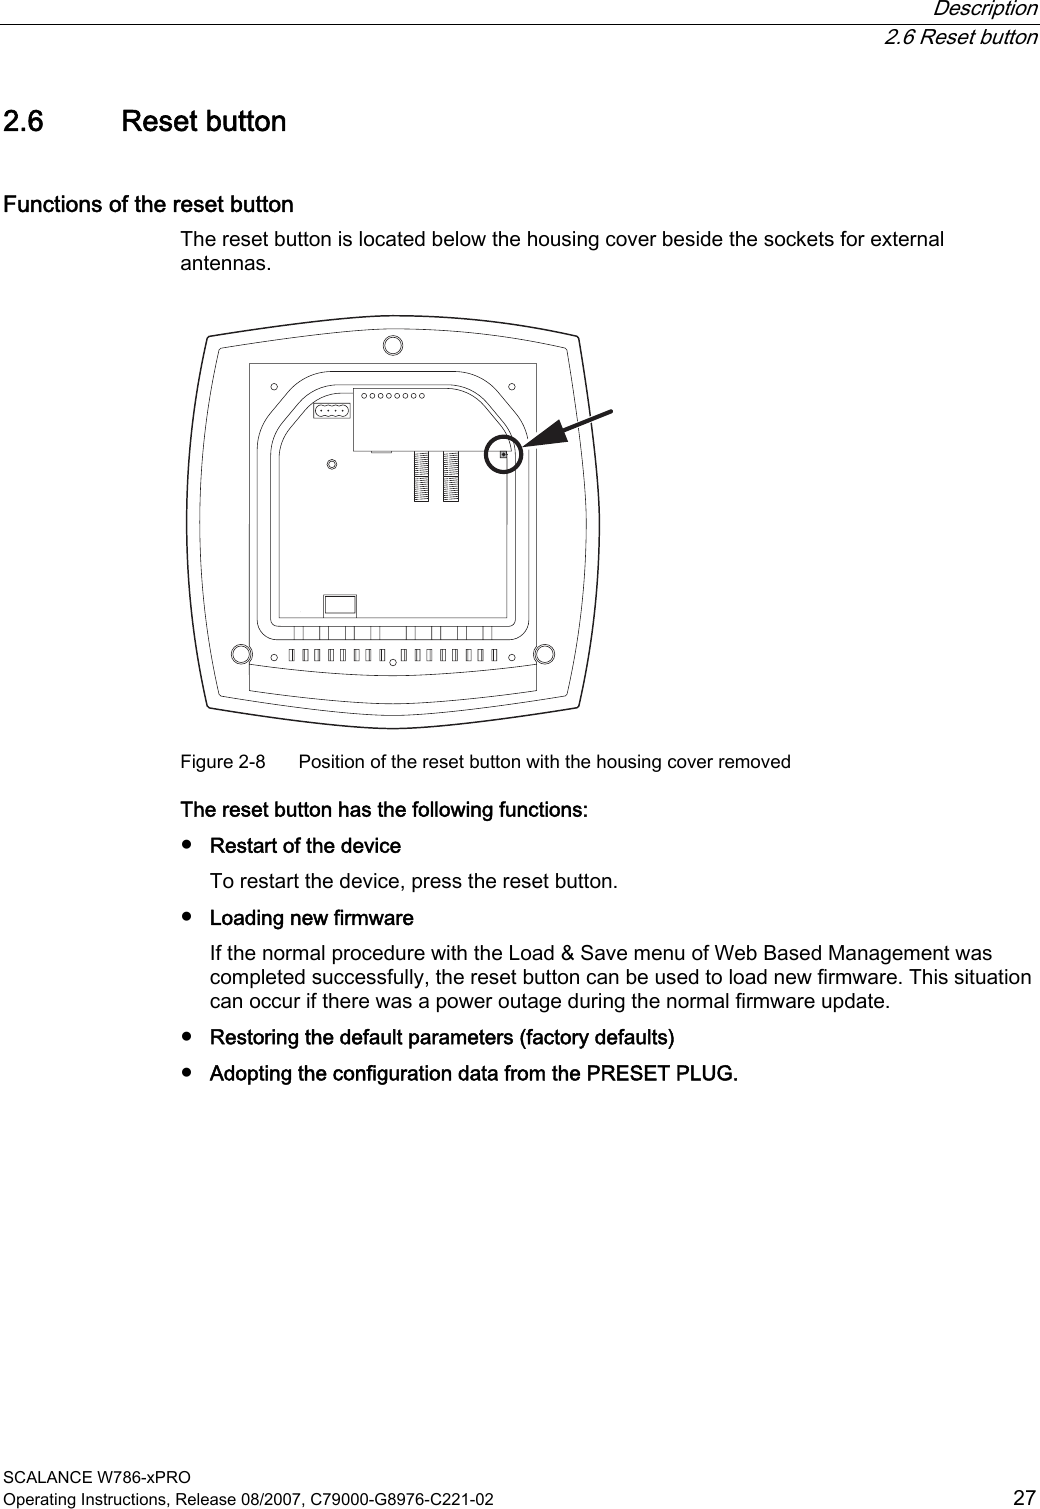  Description  2.6 Reset button SCALANCE W786-xPRO Operating Instructions, Release 08/2007, C79000-G8976-C221-02  27 2.6 Reset button Functions of the reset button The reset button is located below the housing cover beside the sockets for external antennas.  Figure 2-8  Position of the reset button with the housing cover removed The reset button has the following functions: ● Restart of the device To restart the device, press the reset button. ● Loading new firmware If the normal procedure with the Load &amp; Save menu of Web Based Management was completed successfully, the reset button can be used to load new firmware. This situation can occur if there was a power outage during the normal firmware update. ● Restoring the default parameters (factory defaults) ● Adopting the configuration data from the PRESET PLUG. 